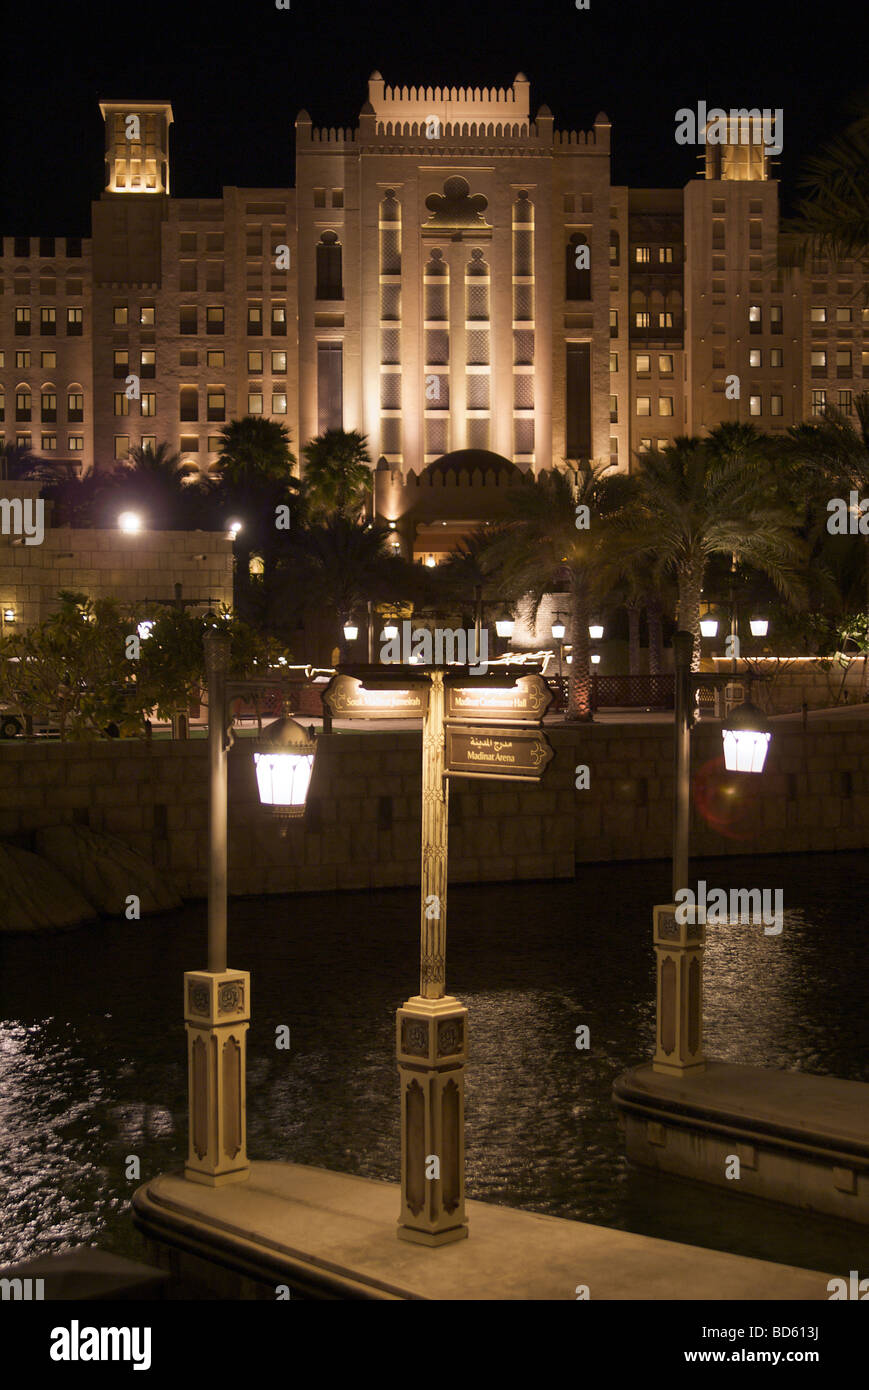 Landing stage for abras (water taxis) at night at the Madinat Jumeirah luxury resort, Dubai, United Arab Emirates (UAE) Stock Photo